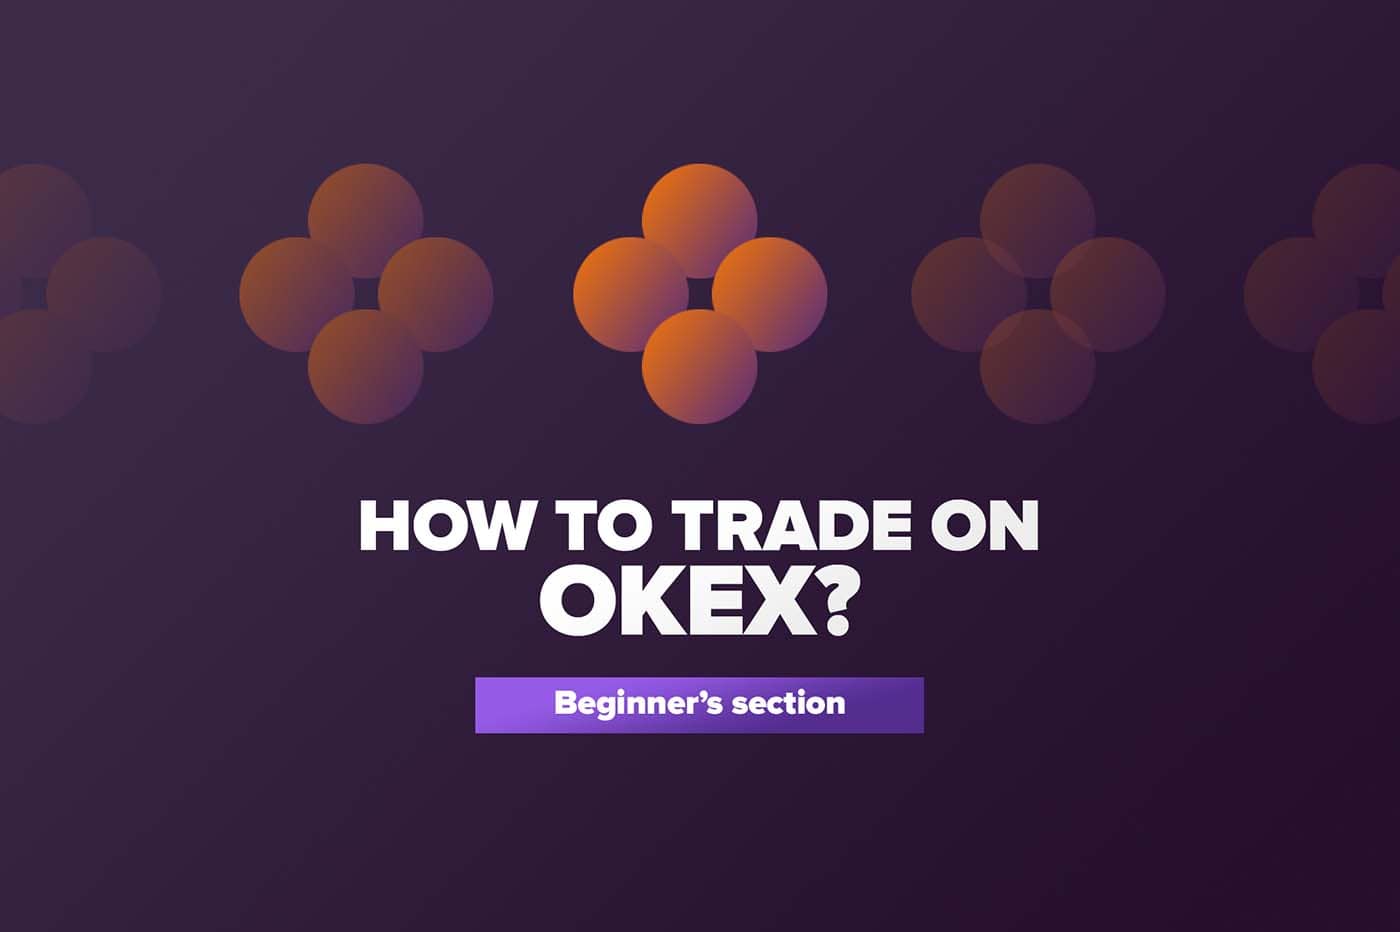 Article How to trade on OKEX?